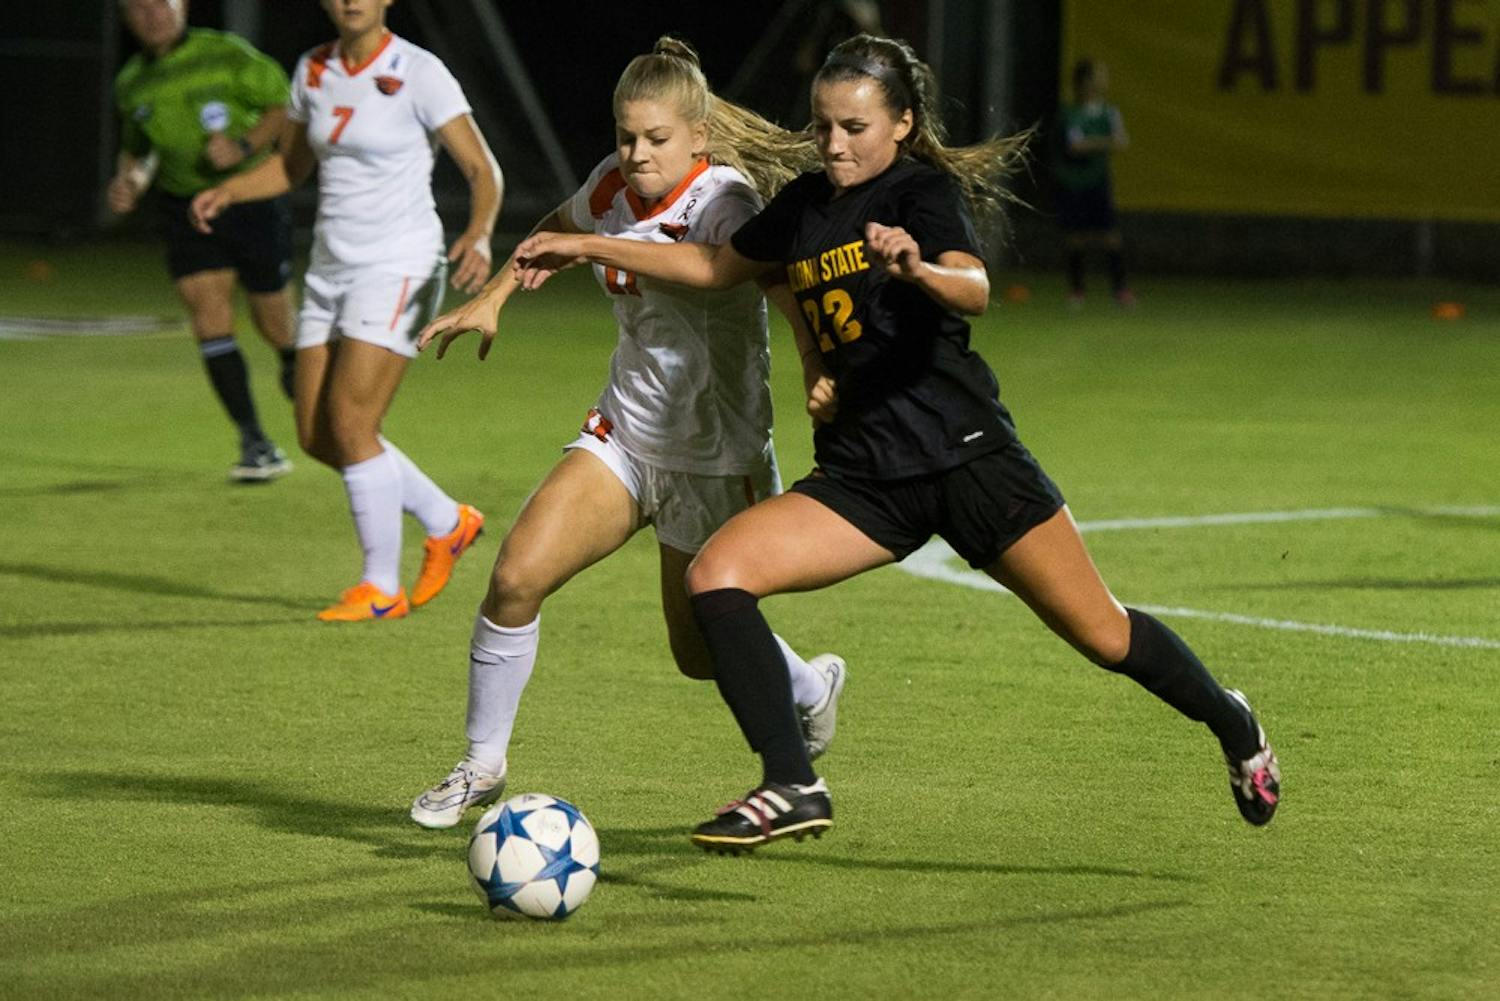 Sophomore defender Madison Stark takes control of the ball against Oregon on Friday, Oct. 23, 2015, at Sun Devil Soccer Stadium in Tempe.